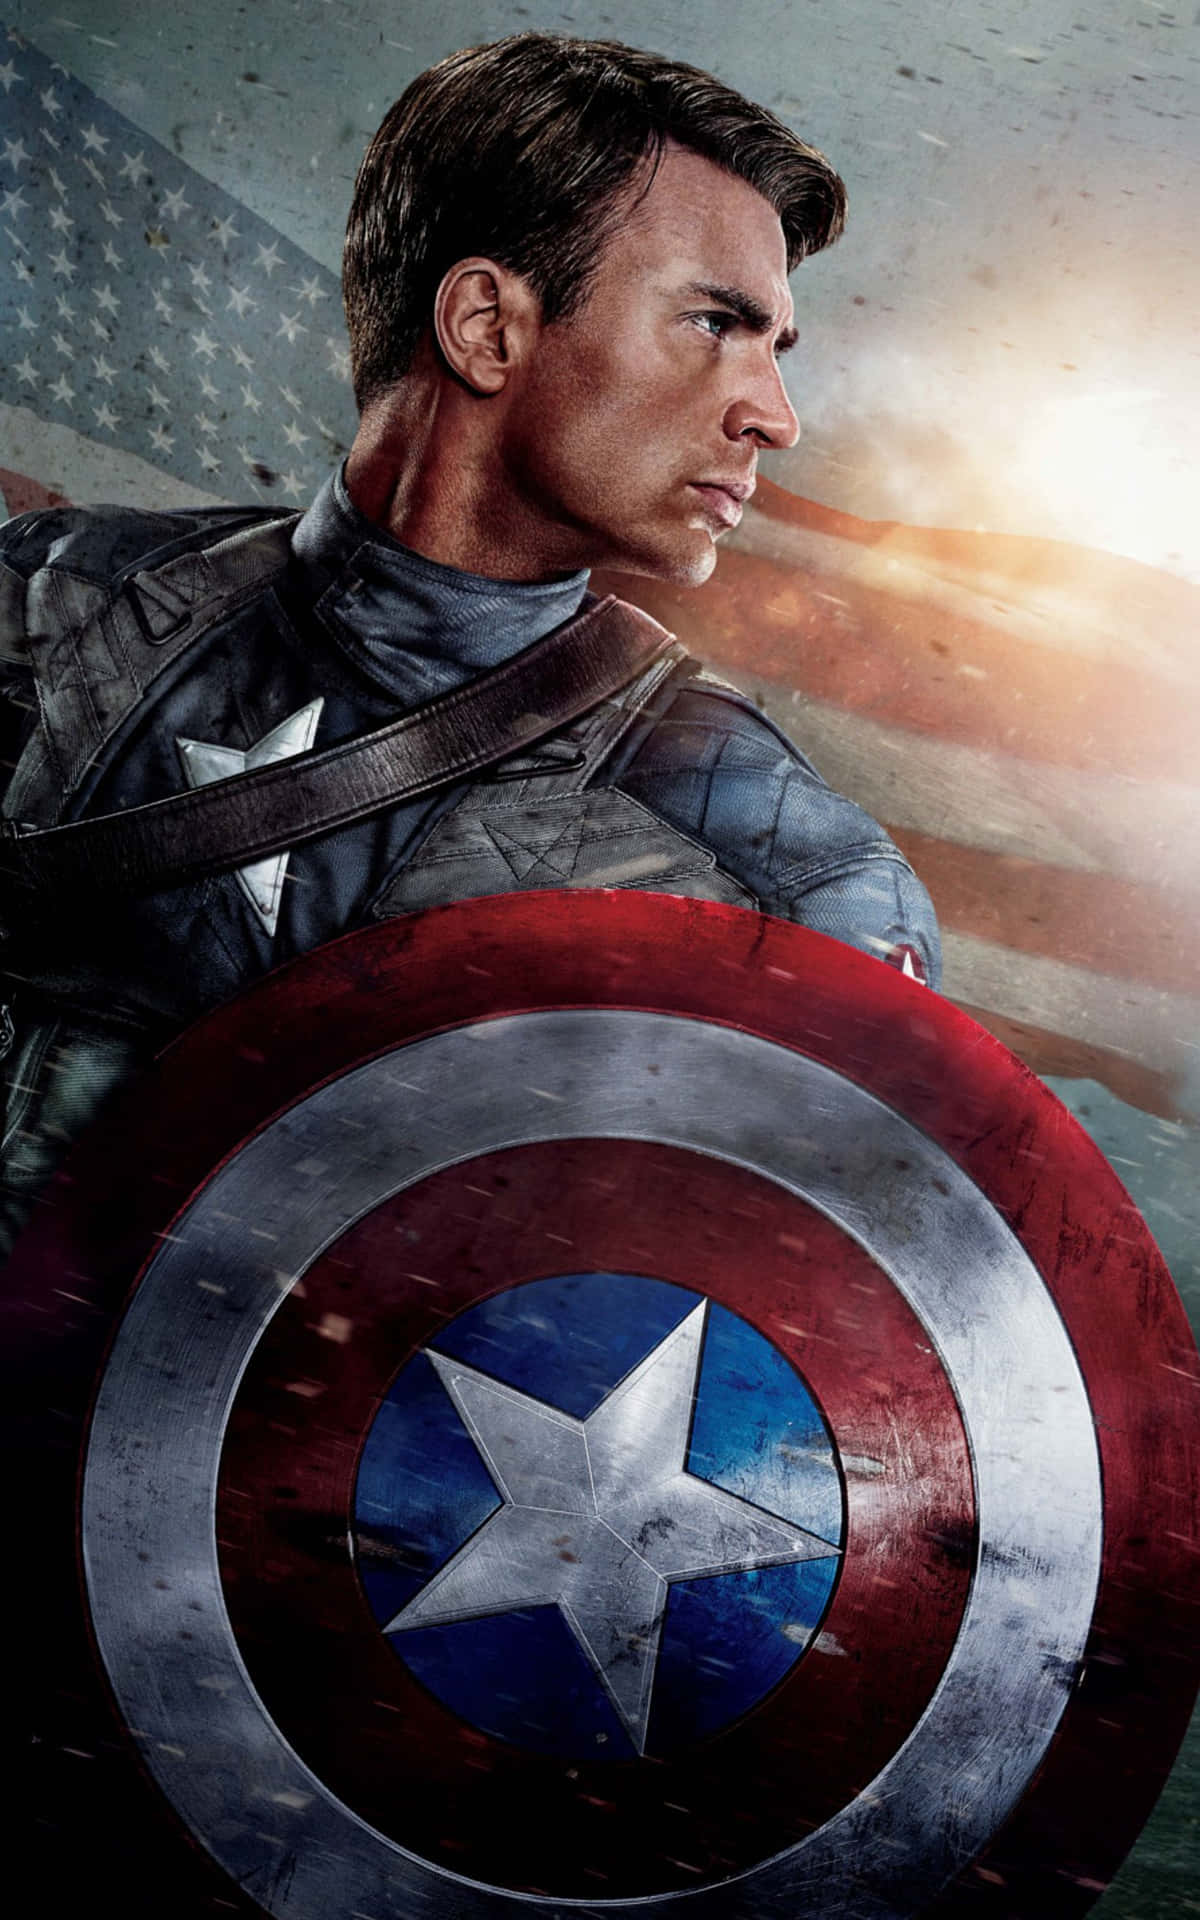 MCU Superhero Captain America The First Avenger With Shield Background